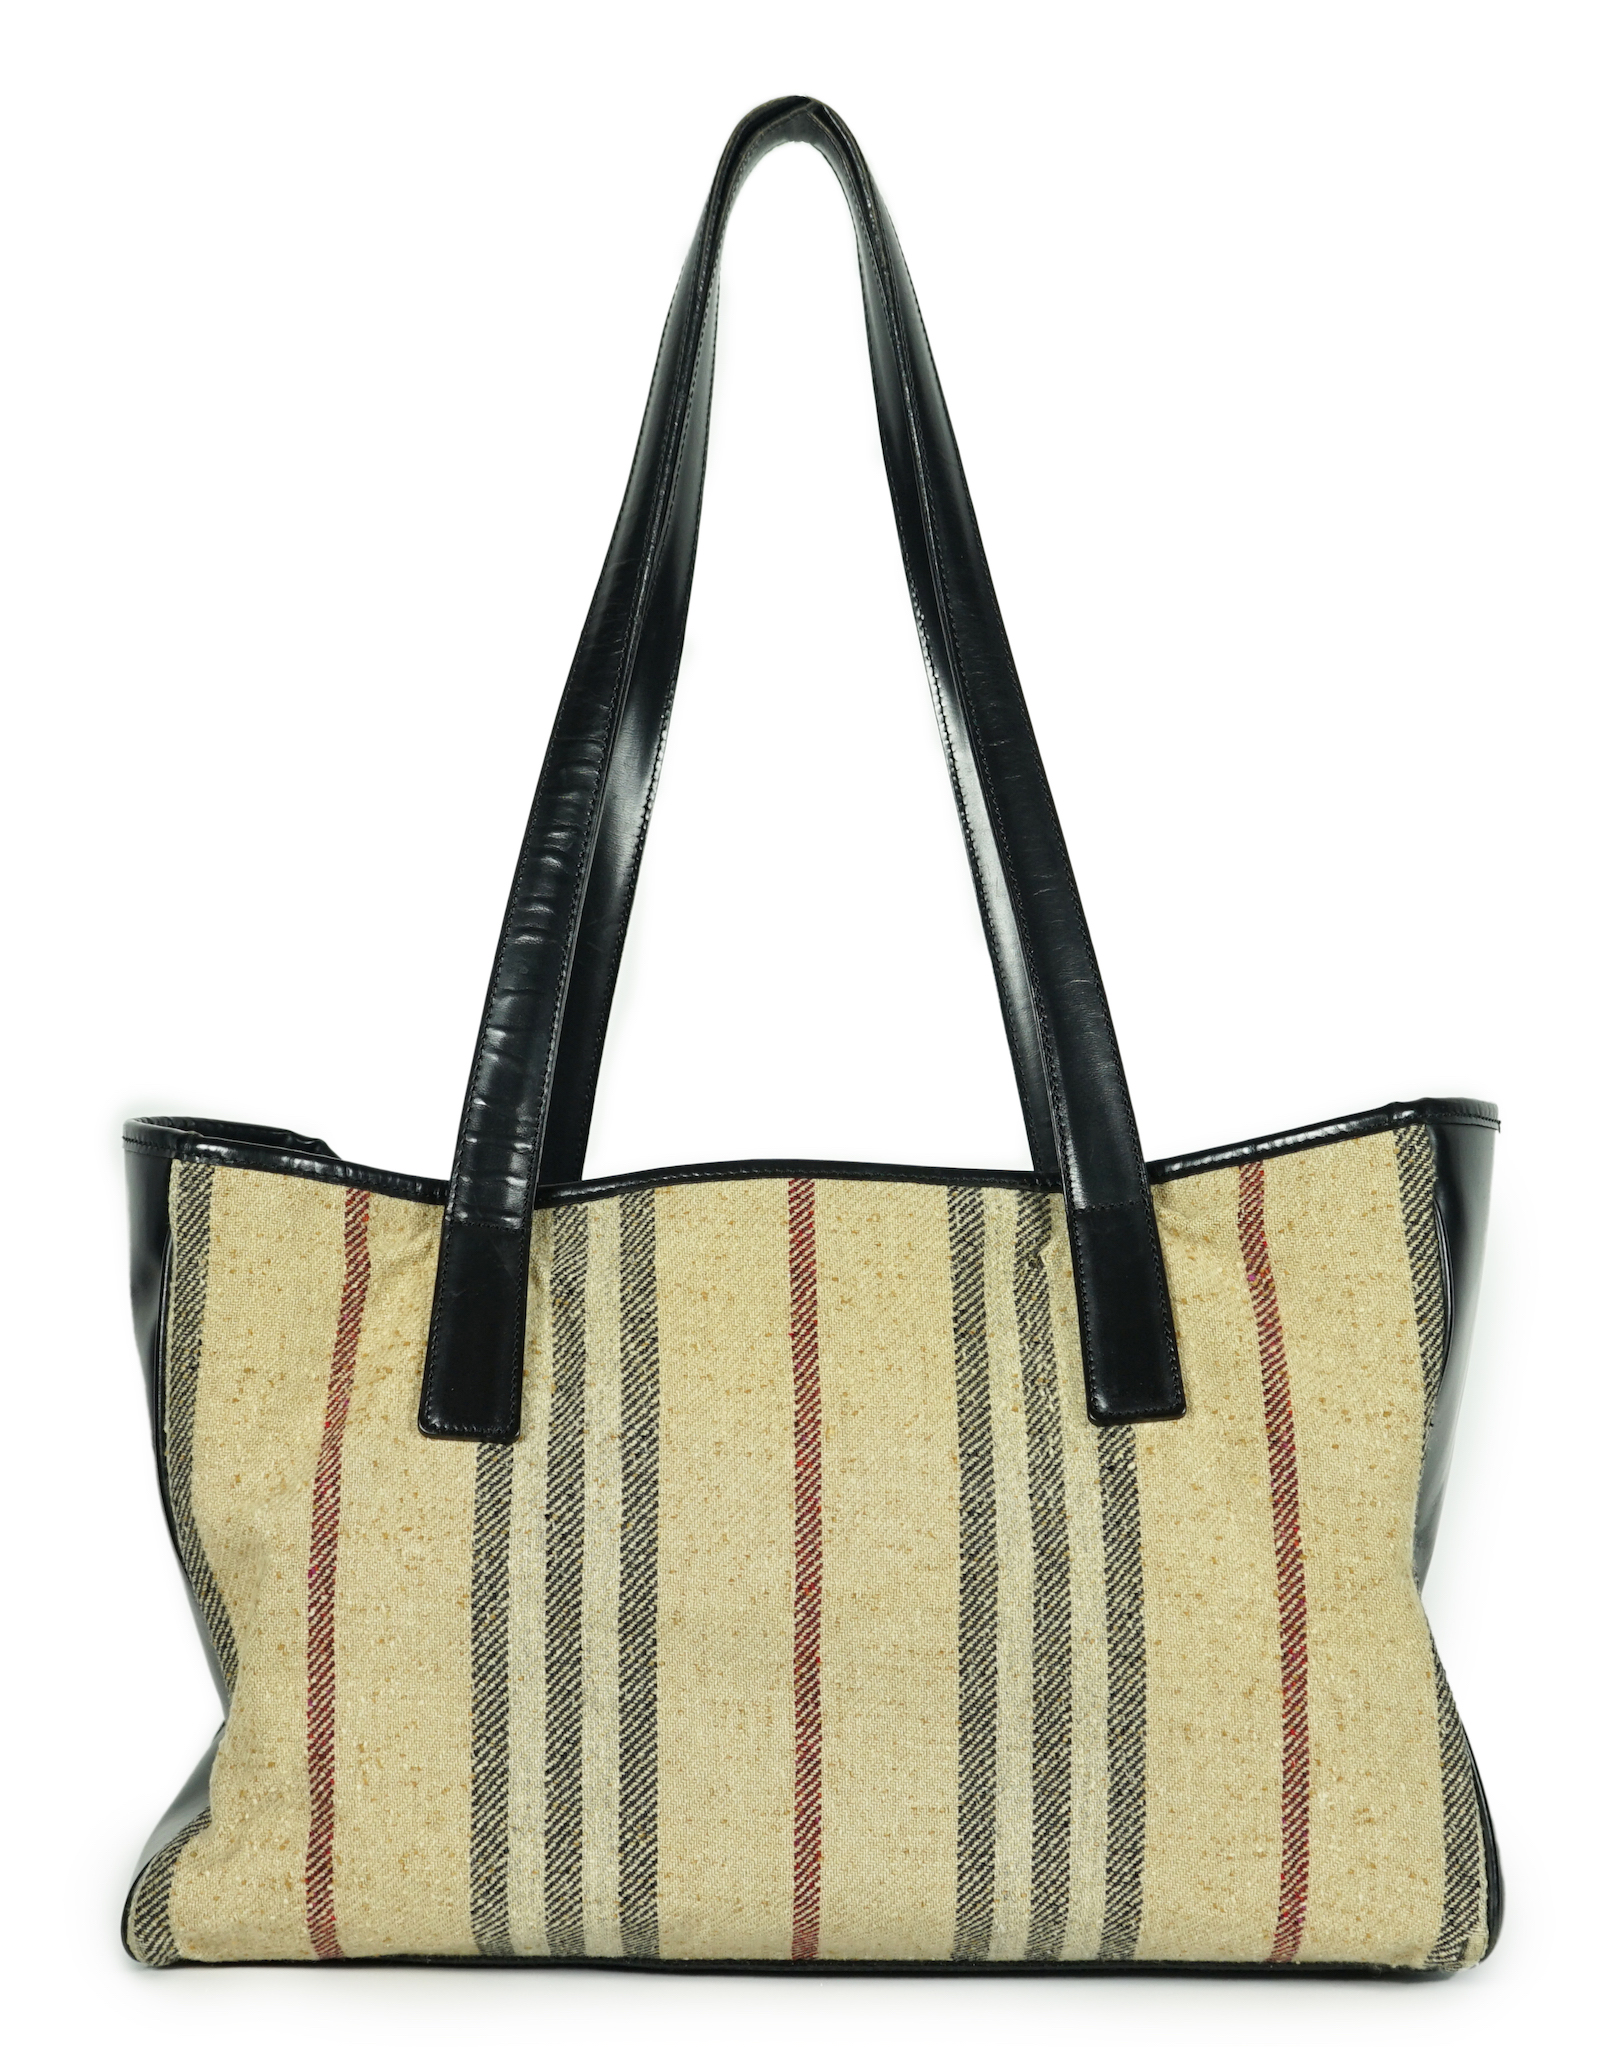 A Burberry fabric and black leather shopper, width 40cm, height 25cm, height overall 56cm, depth 17cm